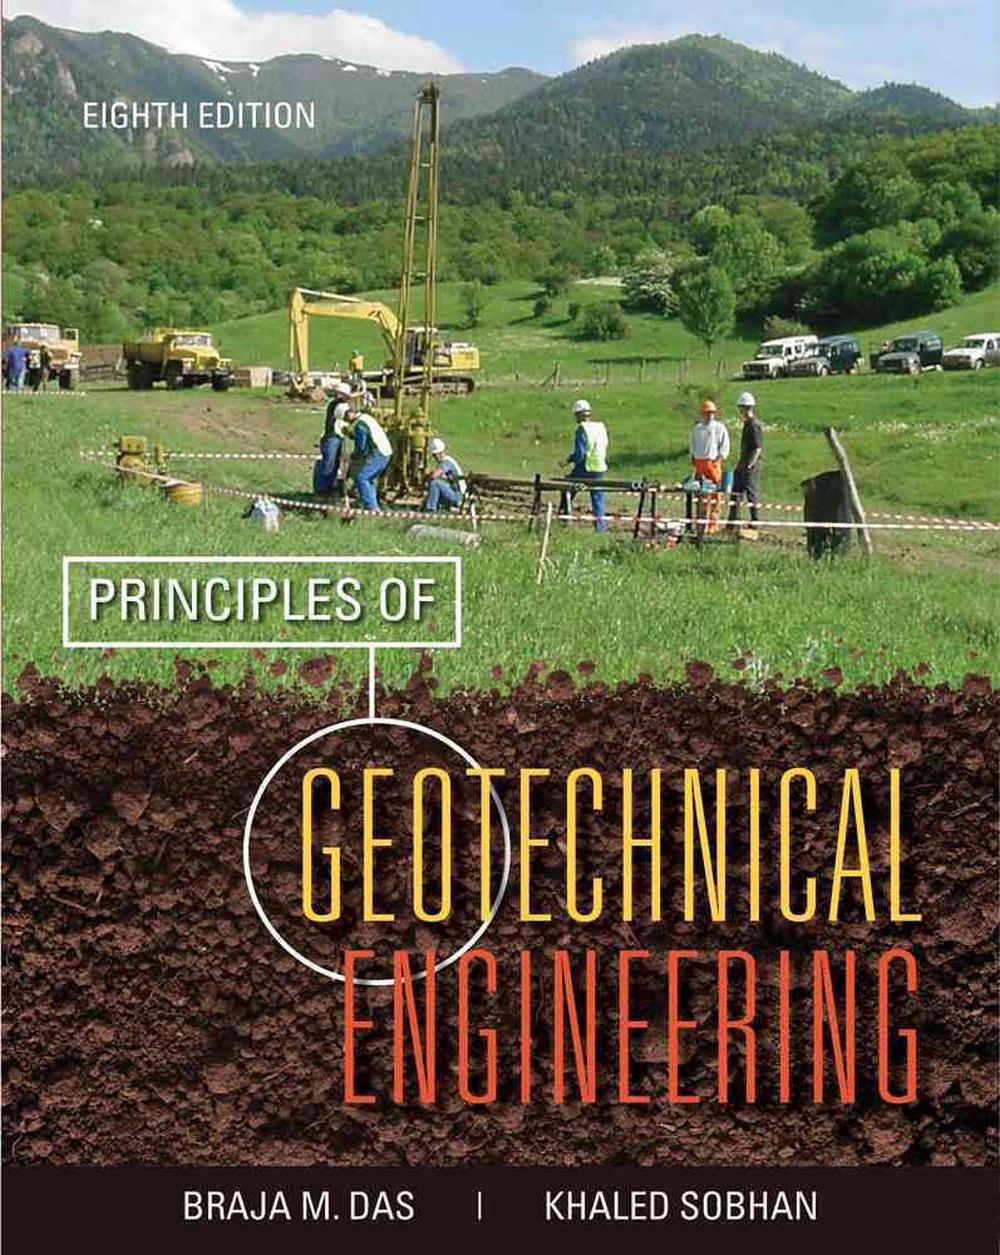 m tech thesis topics in geotechnical engineering